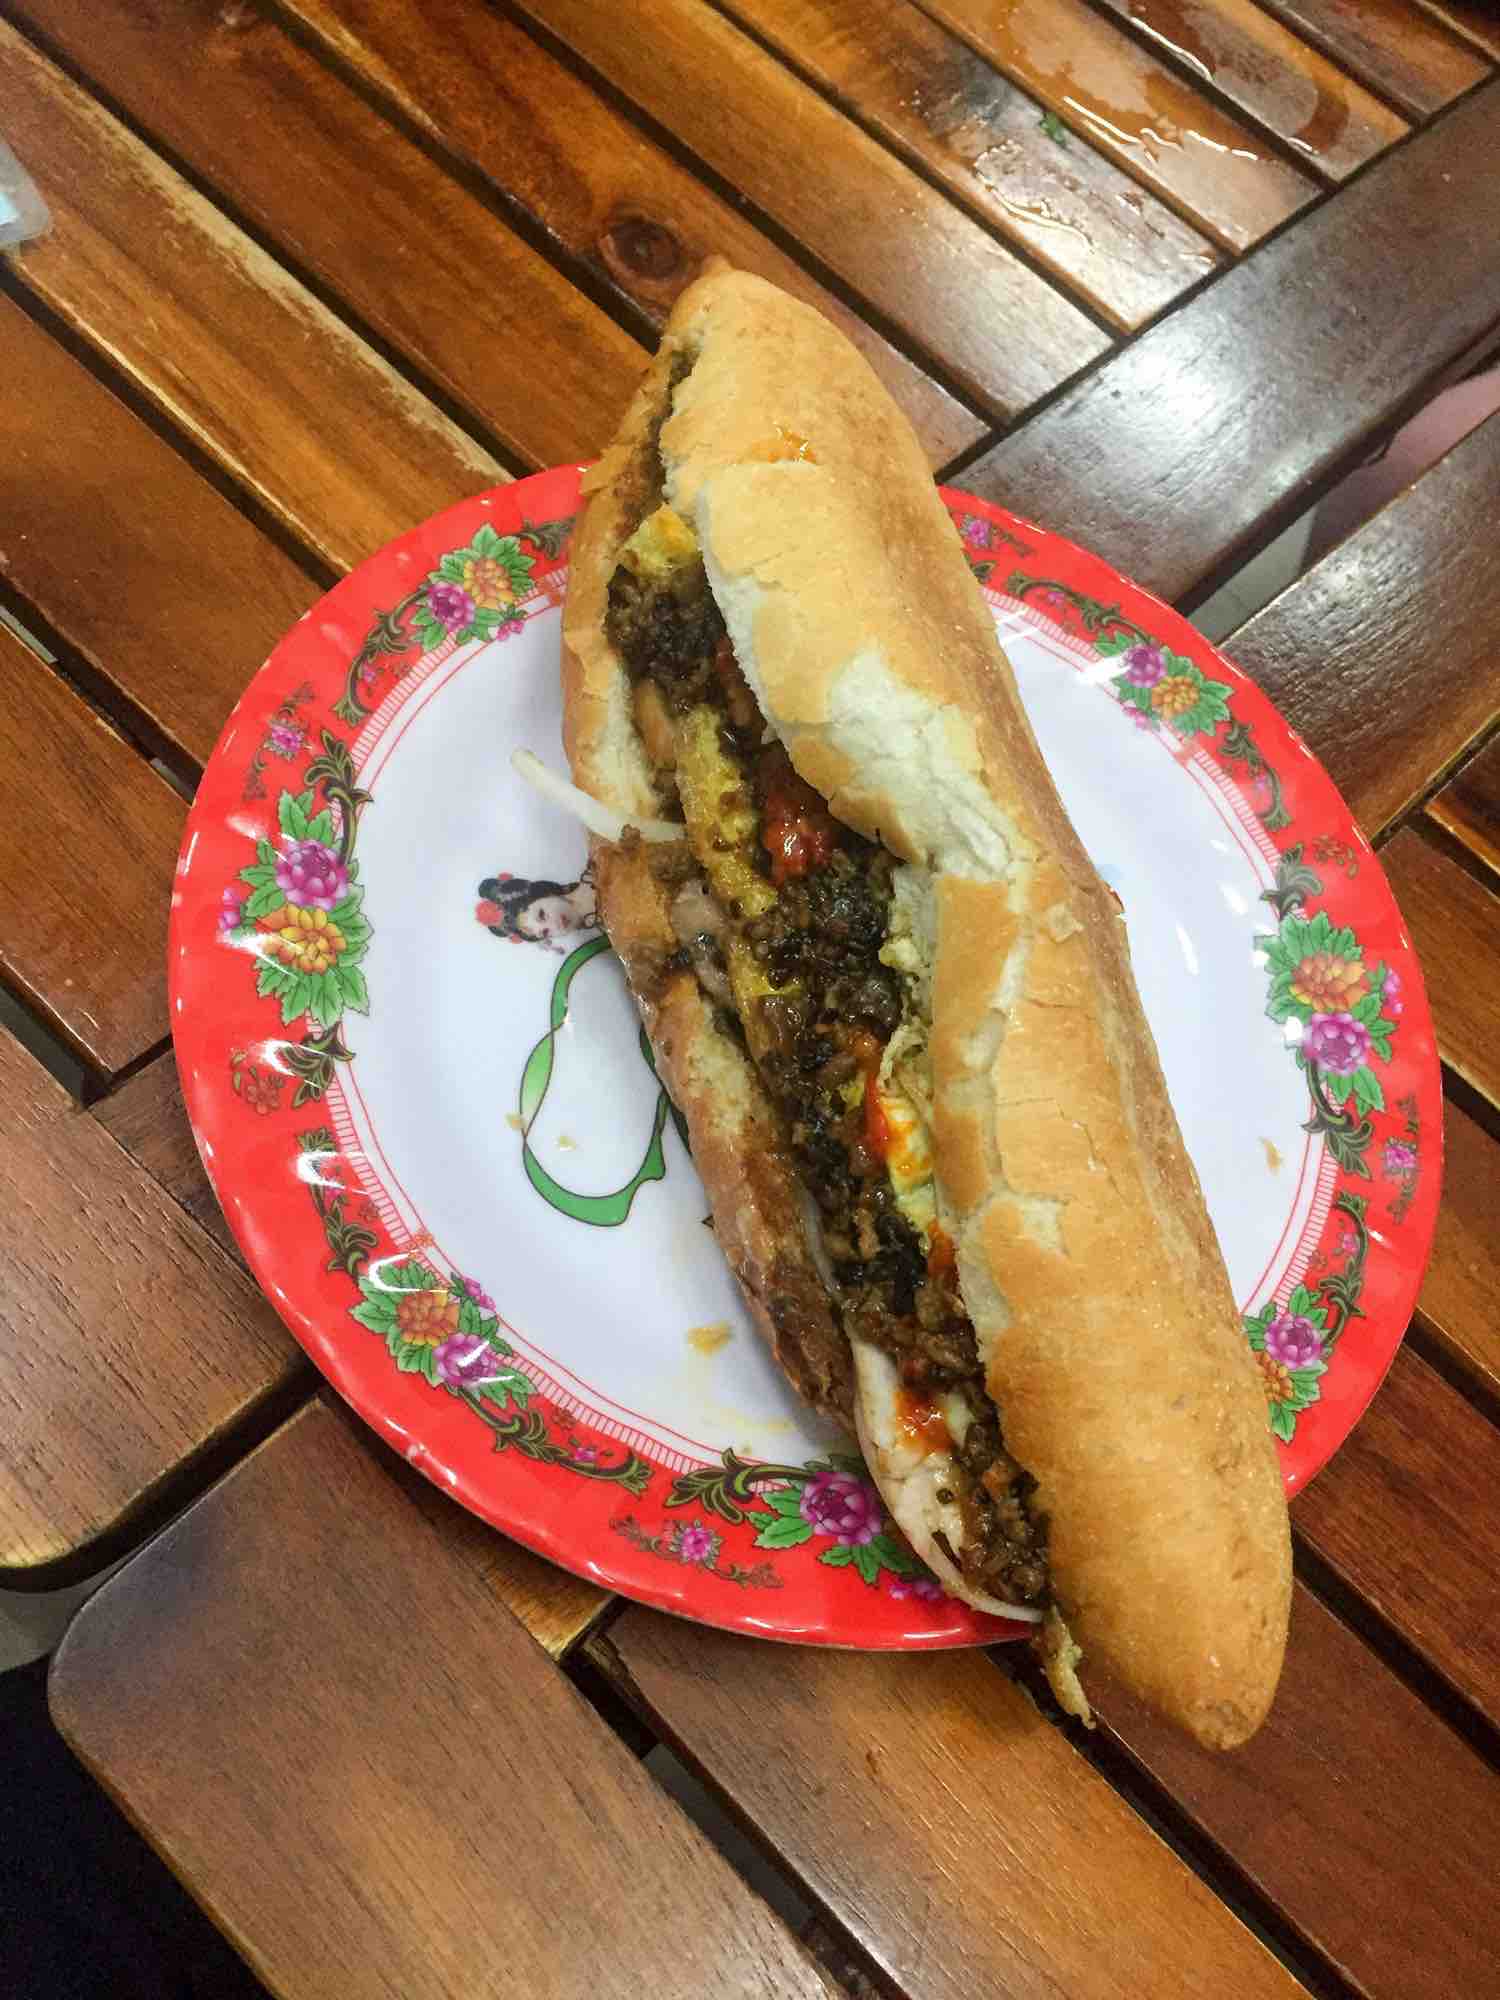 Banh Mi from Vietnam is one of the best sandwiches in the world.